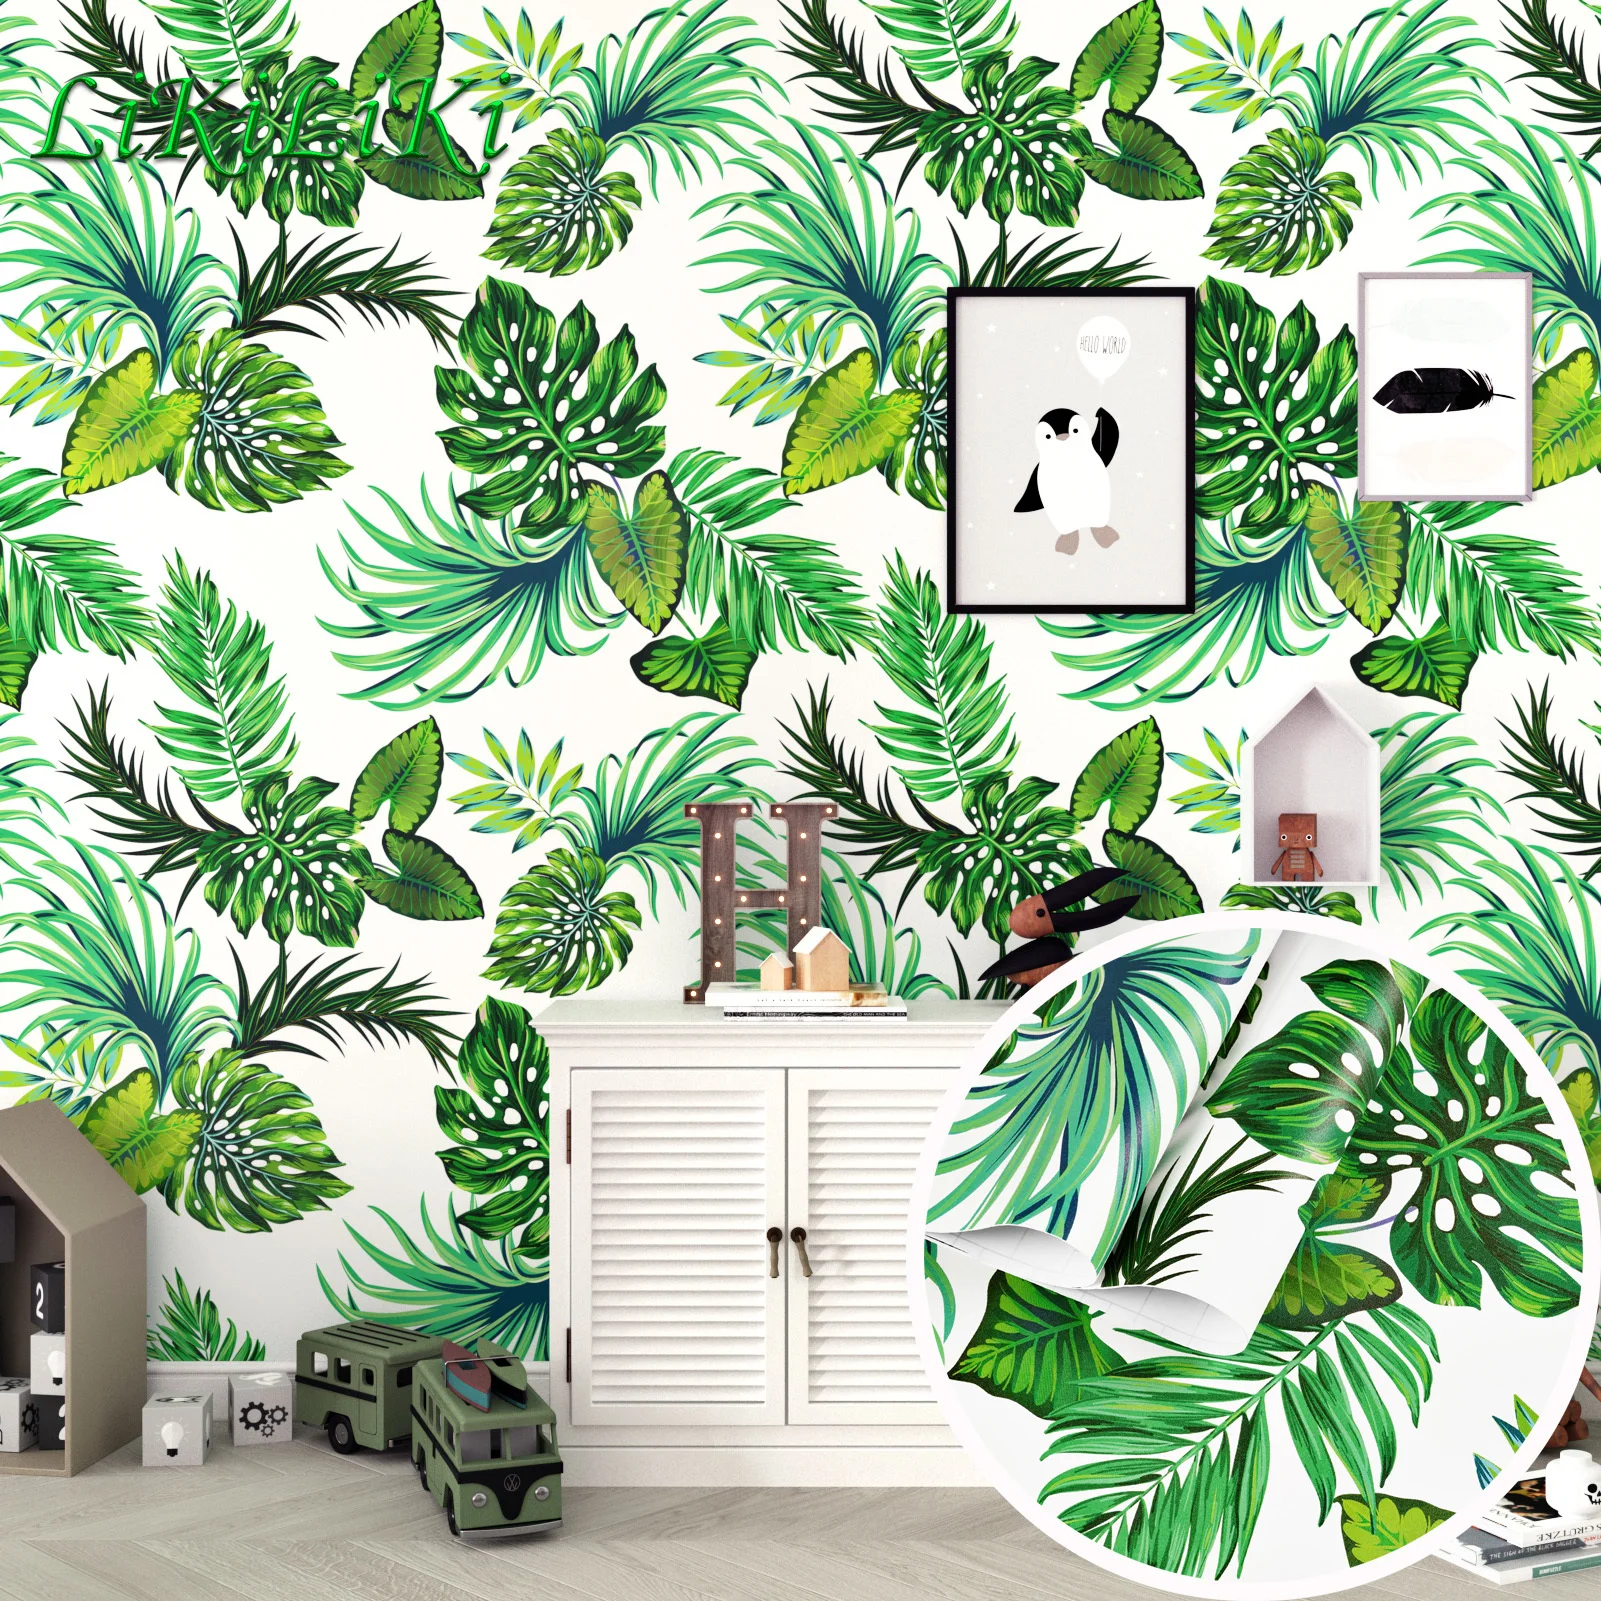 Tropical Leaves Wallpaper  Green Leaves Vine PVC Table Decals Home Bedroom Living Room Decoration DIY Wall Sticker Car Supplies